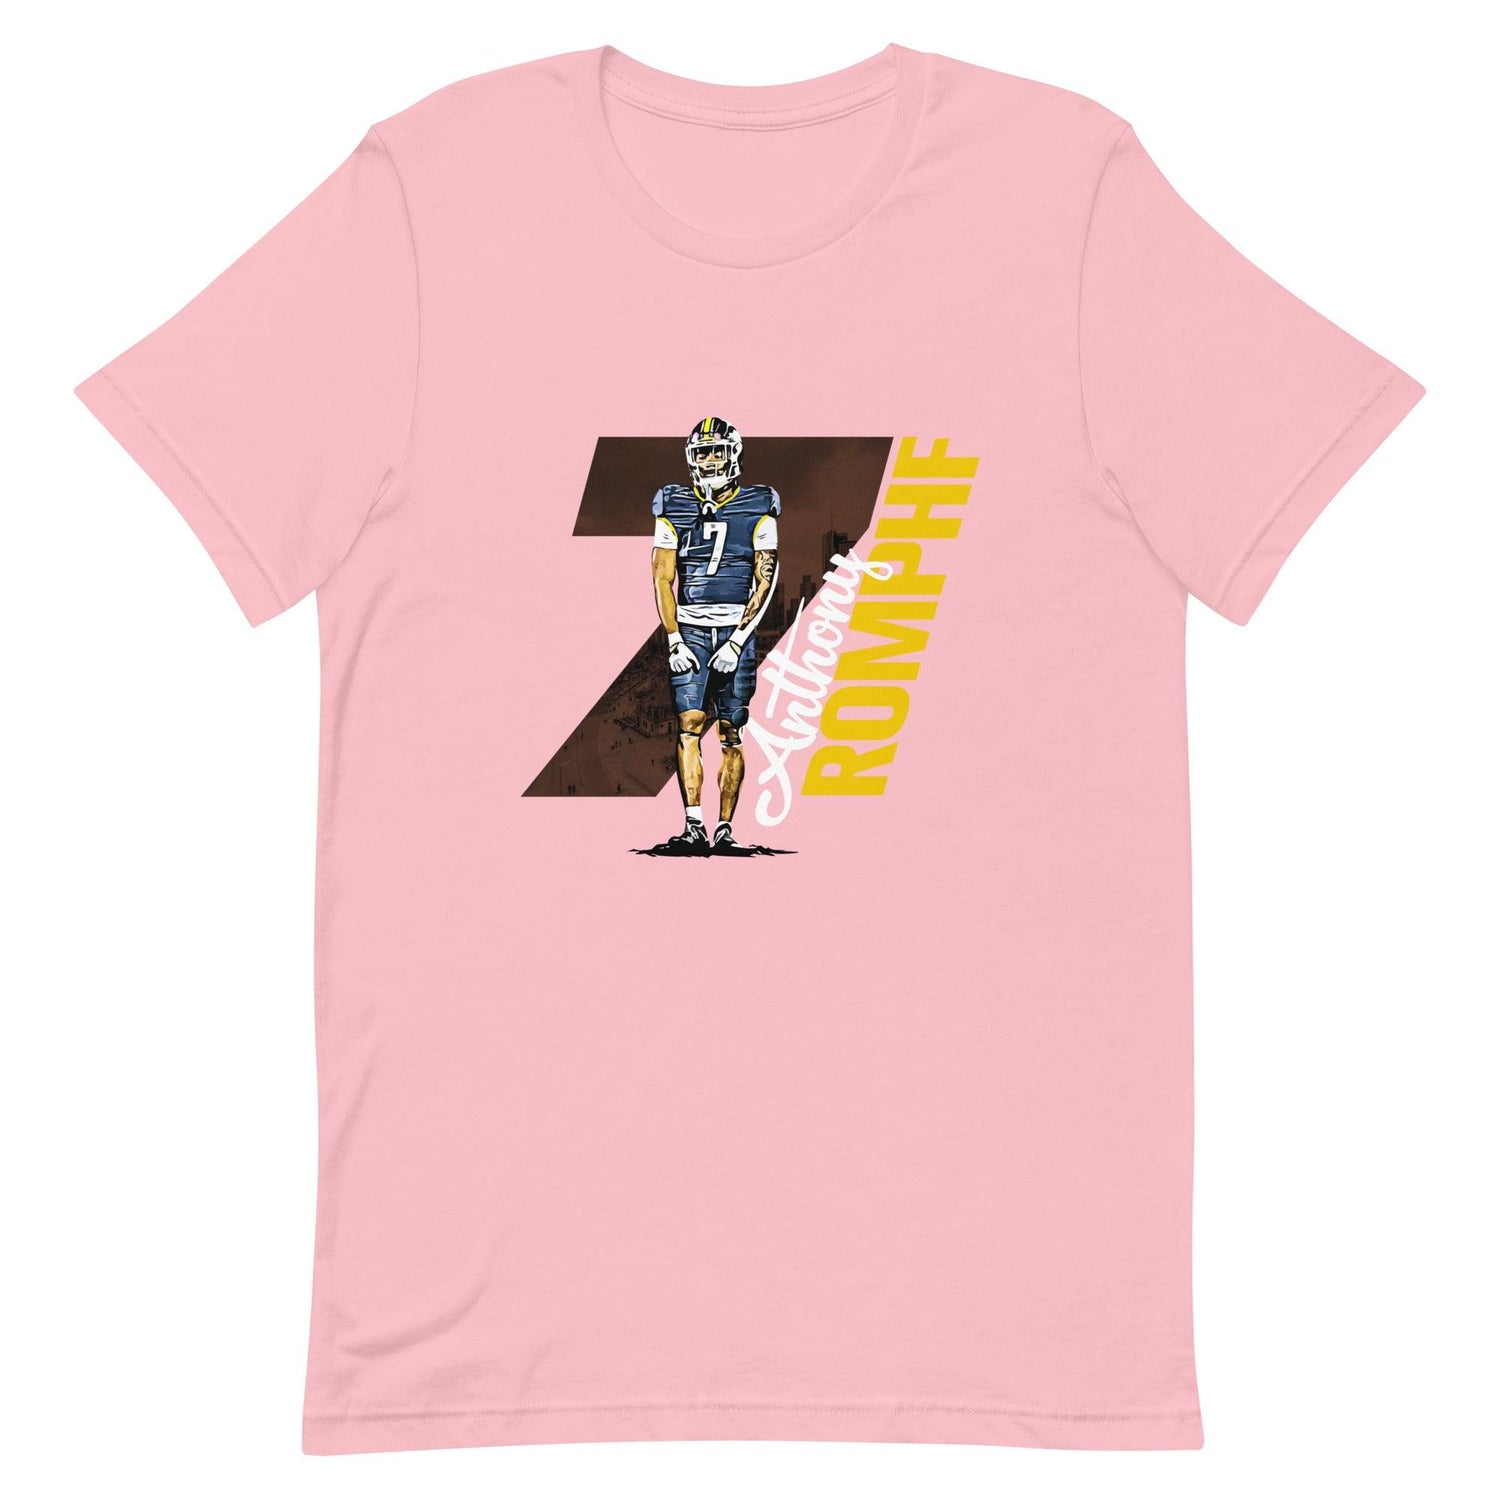 Anthony Romphf "Gameday" t-shirt - Fan Arch